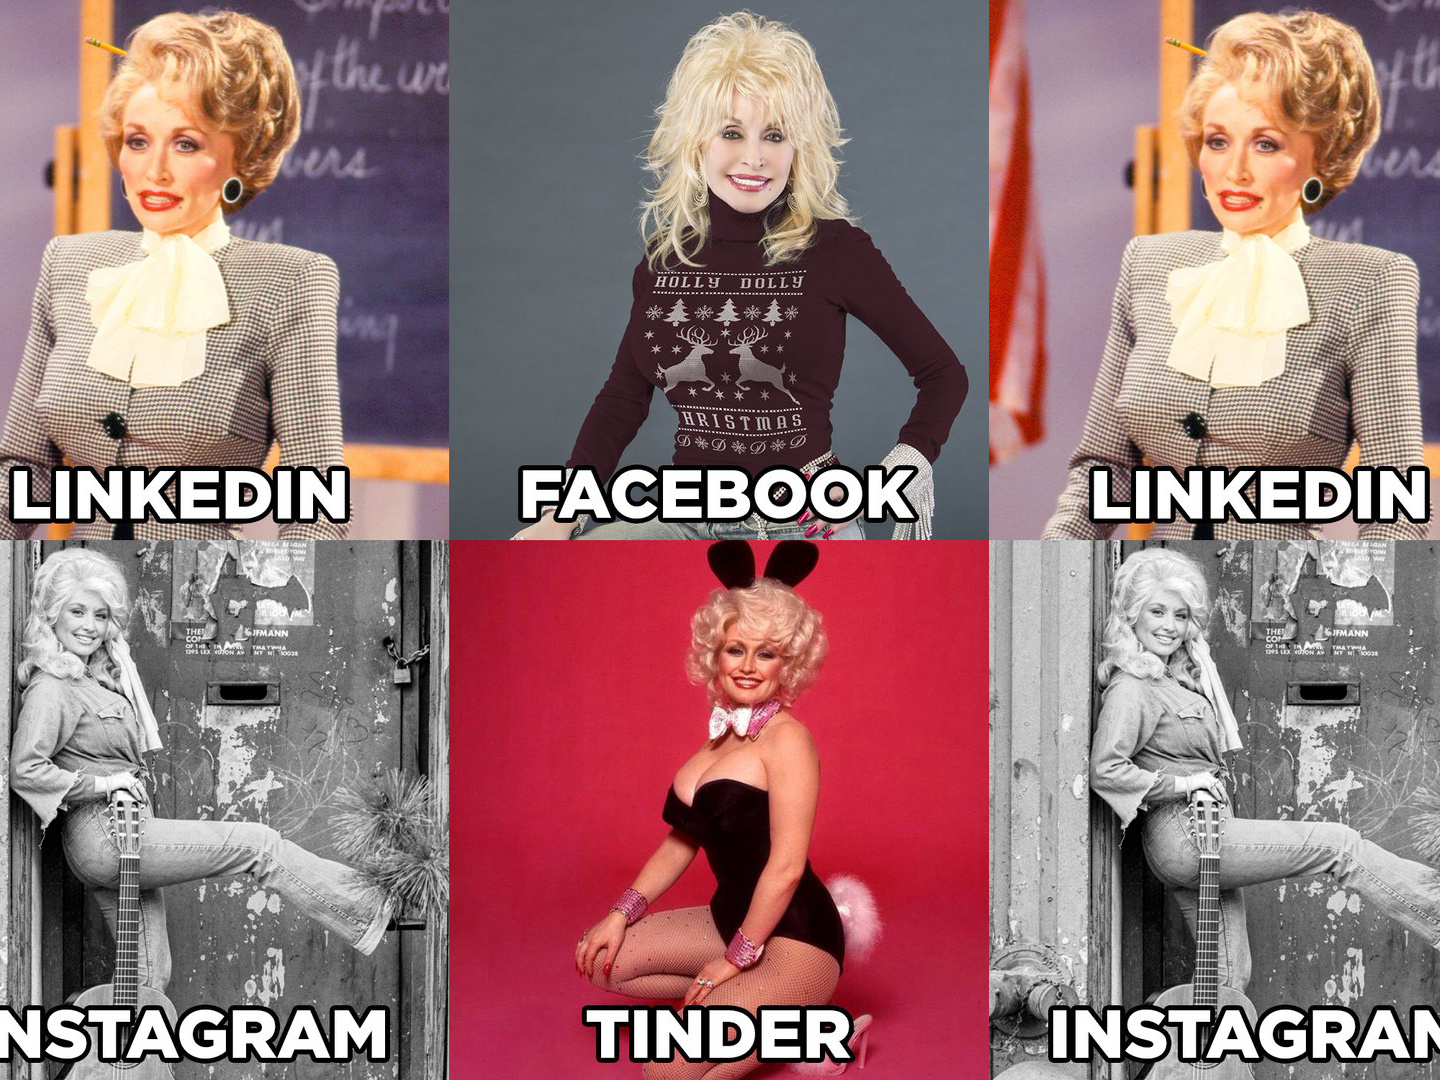 Dolly Parton kicked off a new internet craze late last week and now some automakers are sharing their version of the popular #DollyPartonChallenge meme.